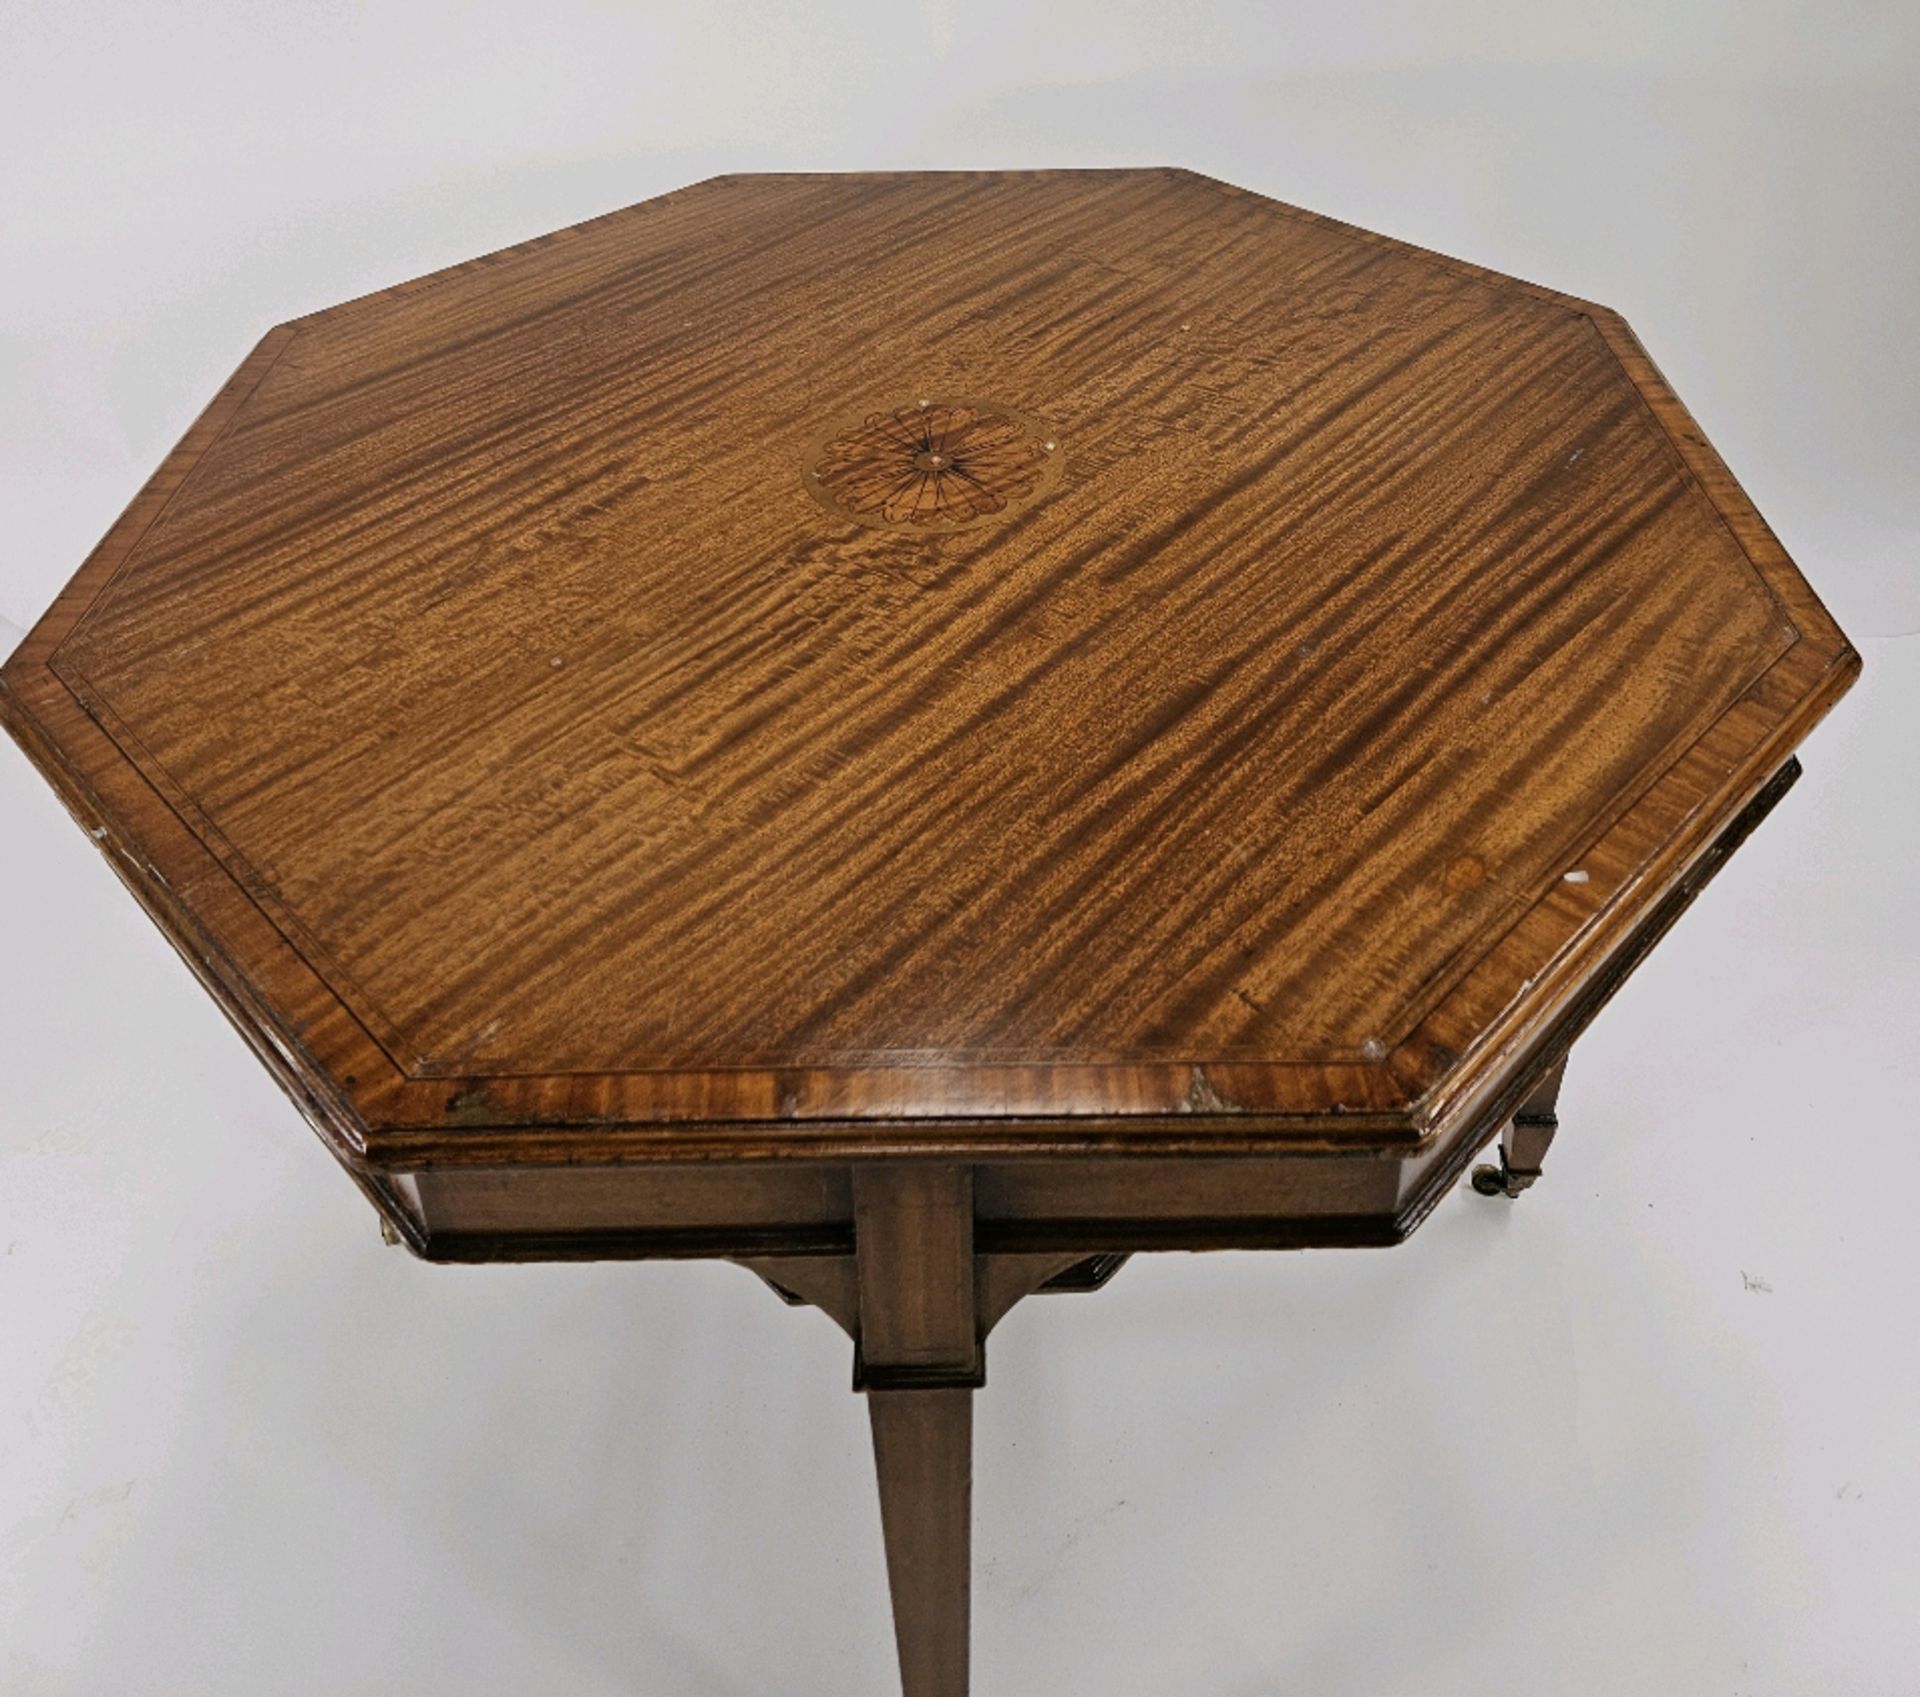 Rosewood Inlaid Occasion Table - Image 5 of 5